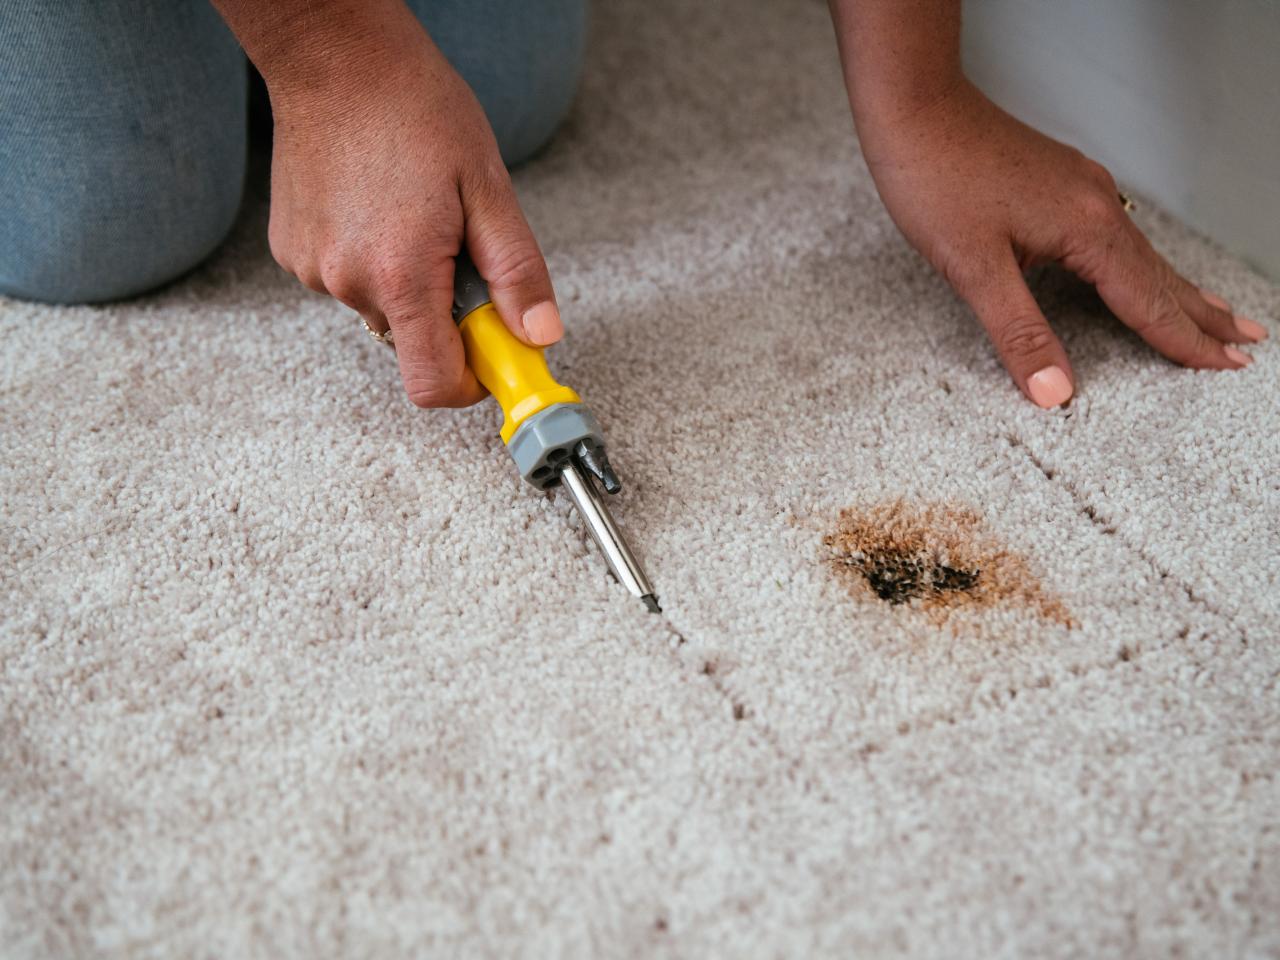 How to Patch Carpet: Easily Repair & Replace Damaged Areas